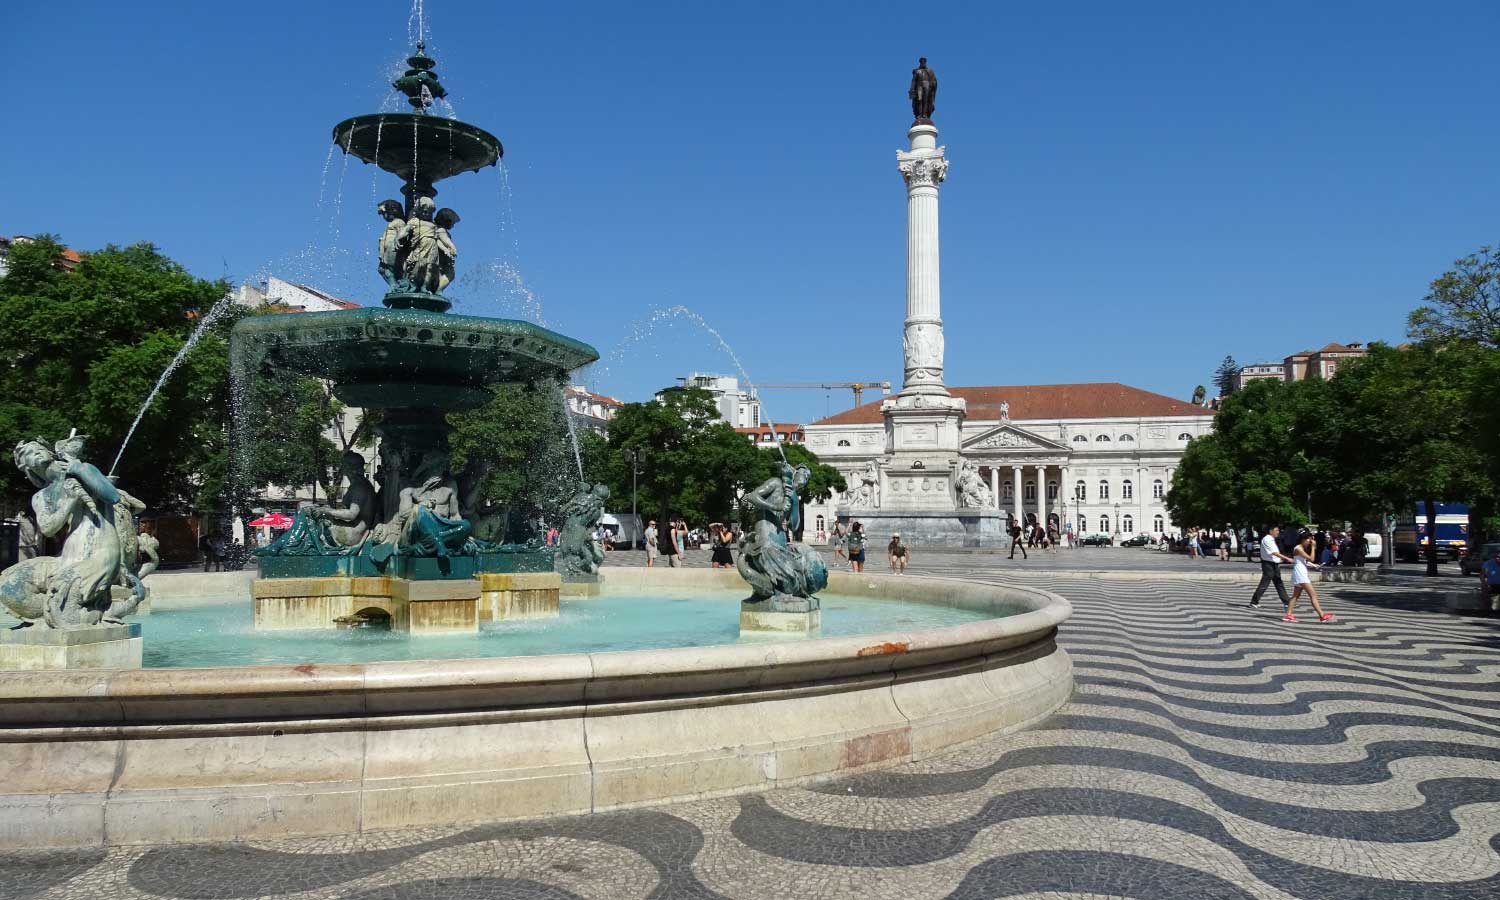 Money saving tips for Lisbon - Shows an iconic monument and square